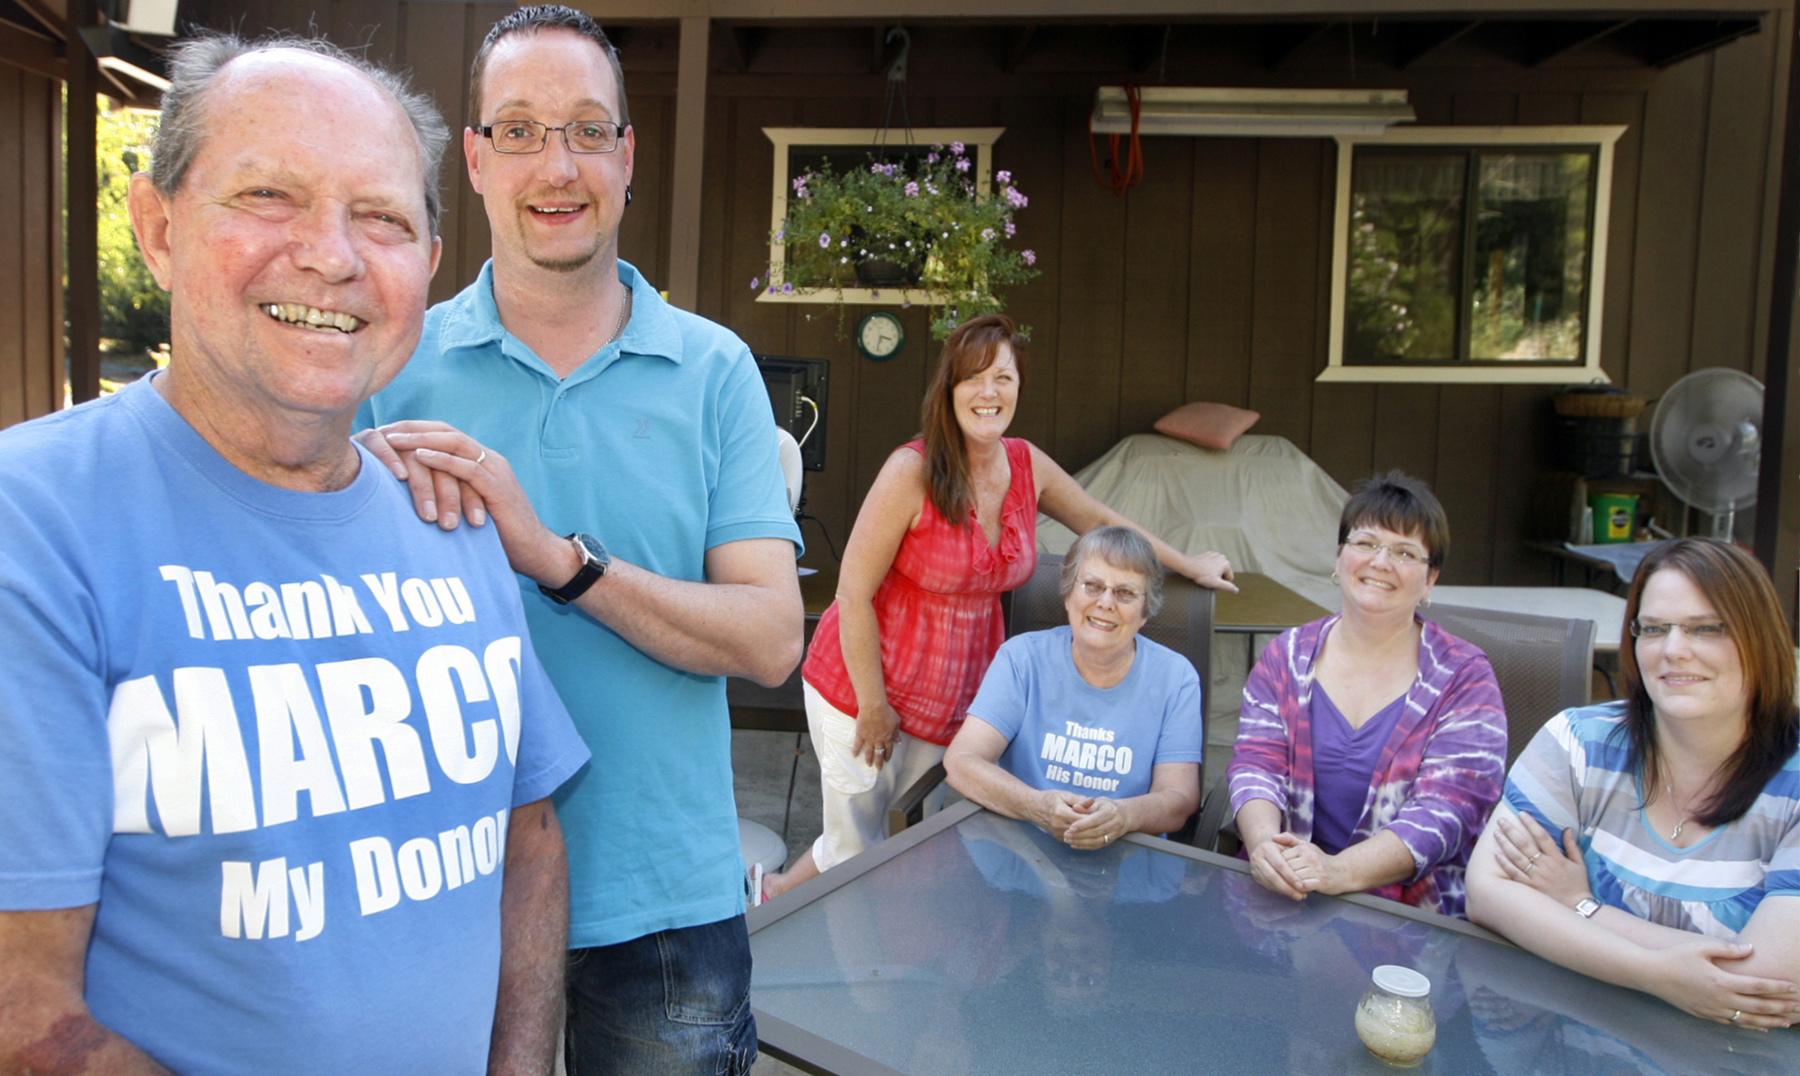 Jerry Condit, left, stands next to Marco Rixen, who lives in Germany, at Condit's home in Grants Pass, Ore. Condit's family -- from left, daughter Kimberly Condit-Stutesman; wife, Jan; and daughter Michelle Condit-McBride -- and Rixen's wife, Anja, far right, look on Sept. 19.